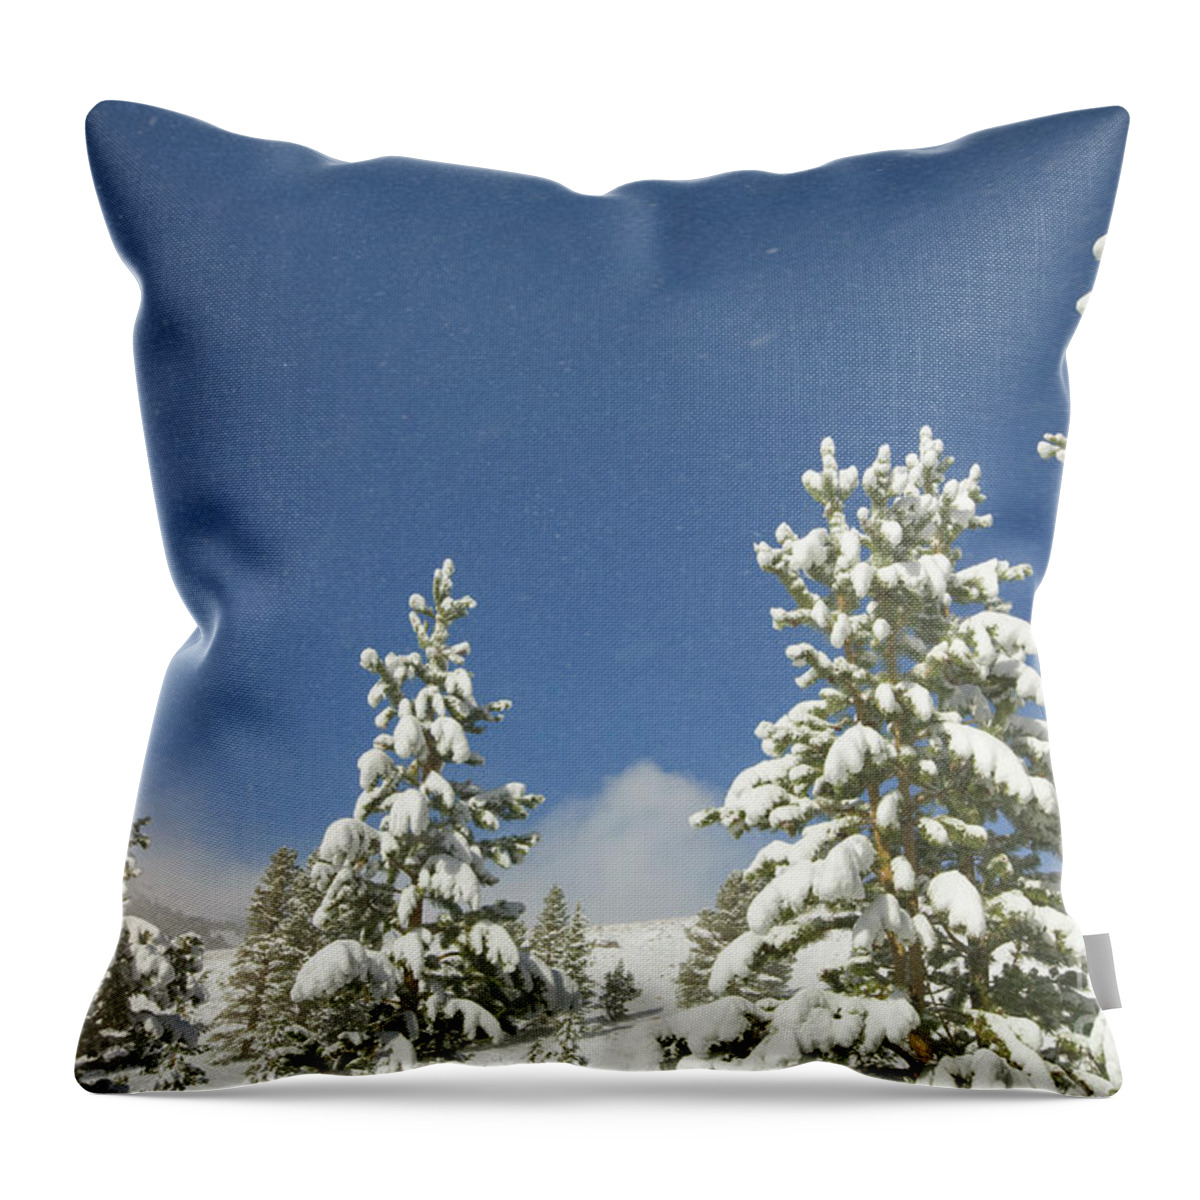 00431184 Throw Pillow featuring the photograph Lodgepole Pines In The Wind by Yva Momatiuk John Eastcott